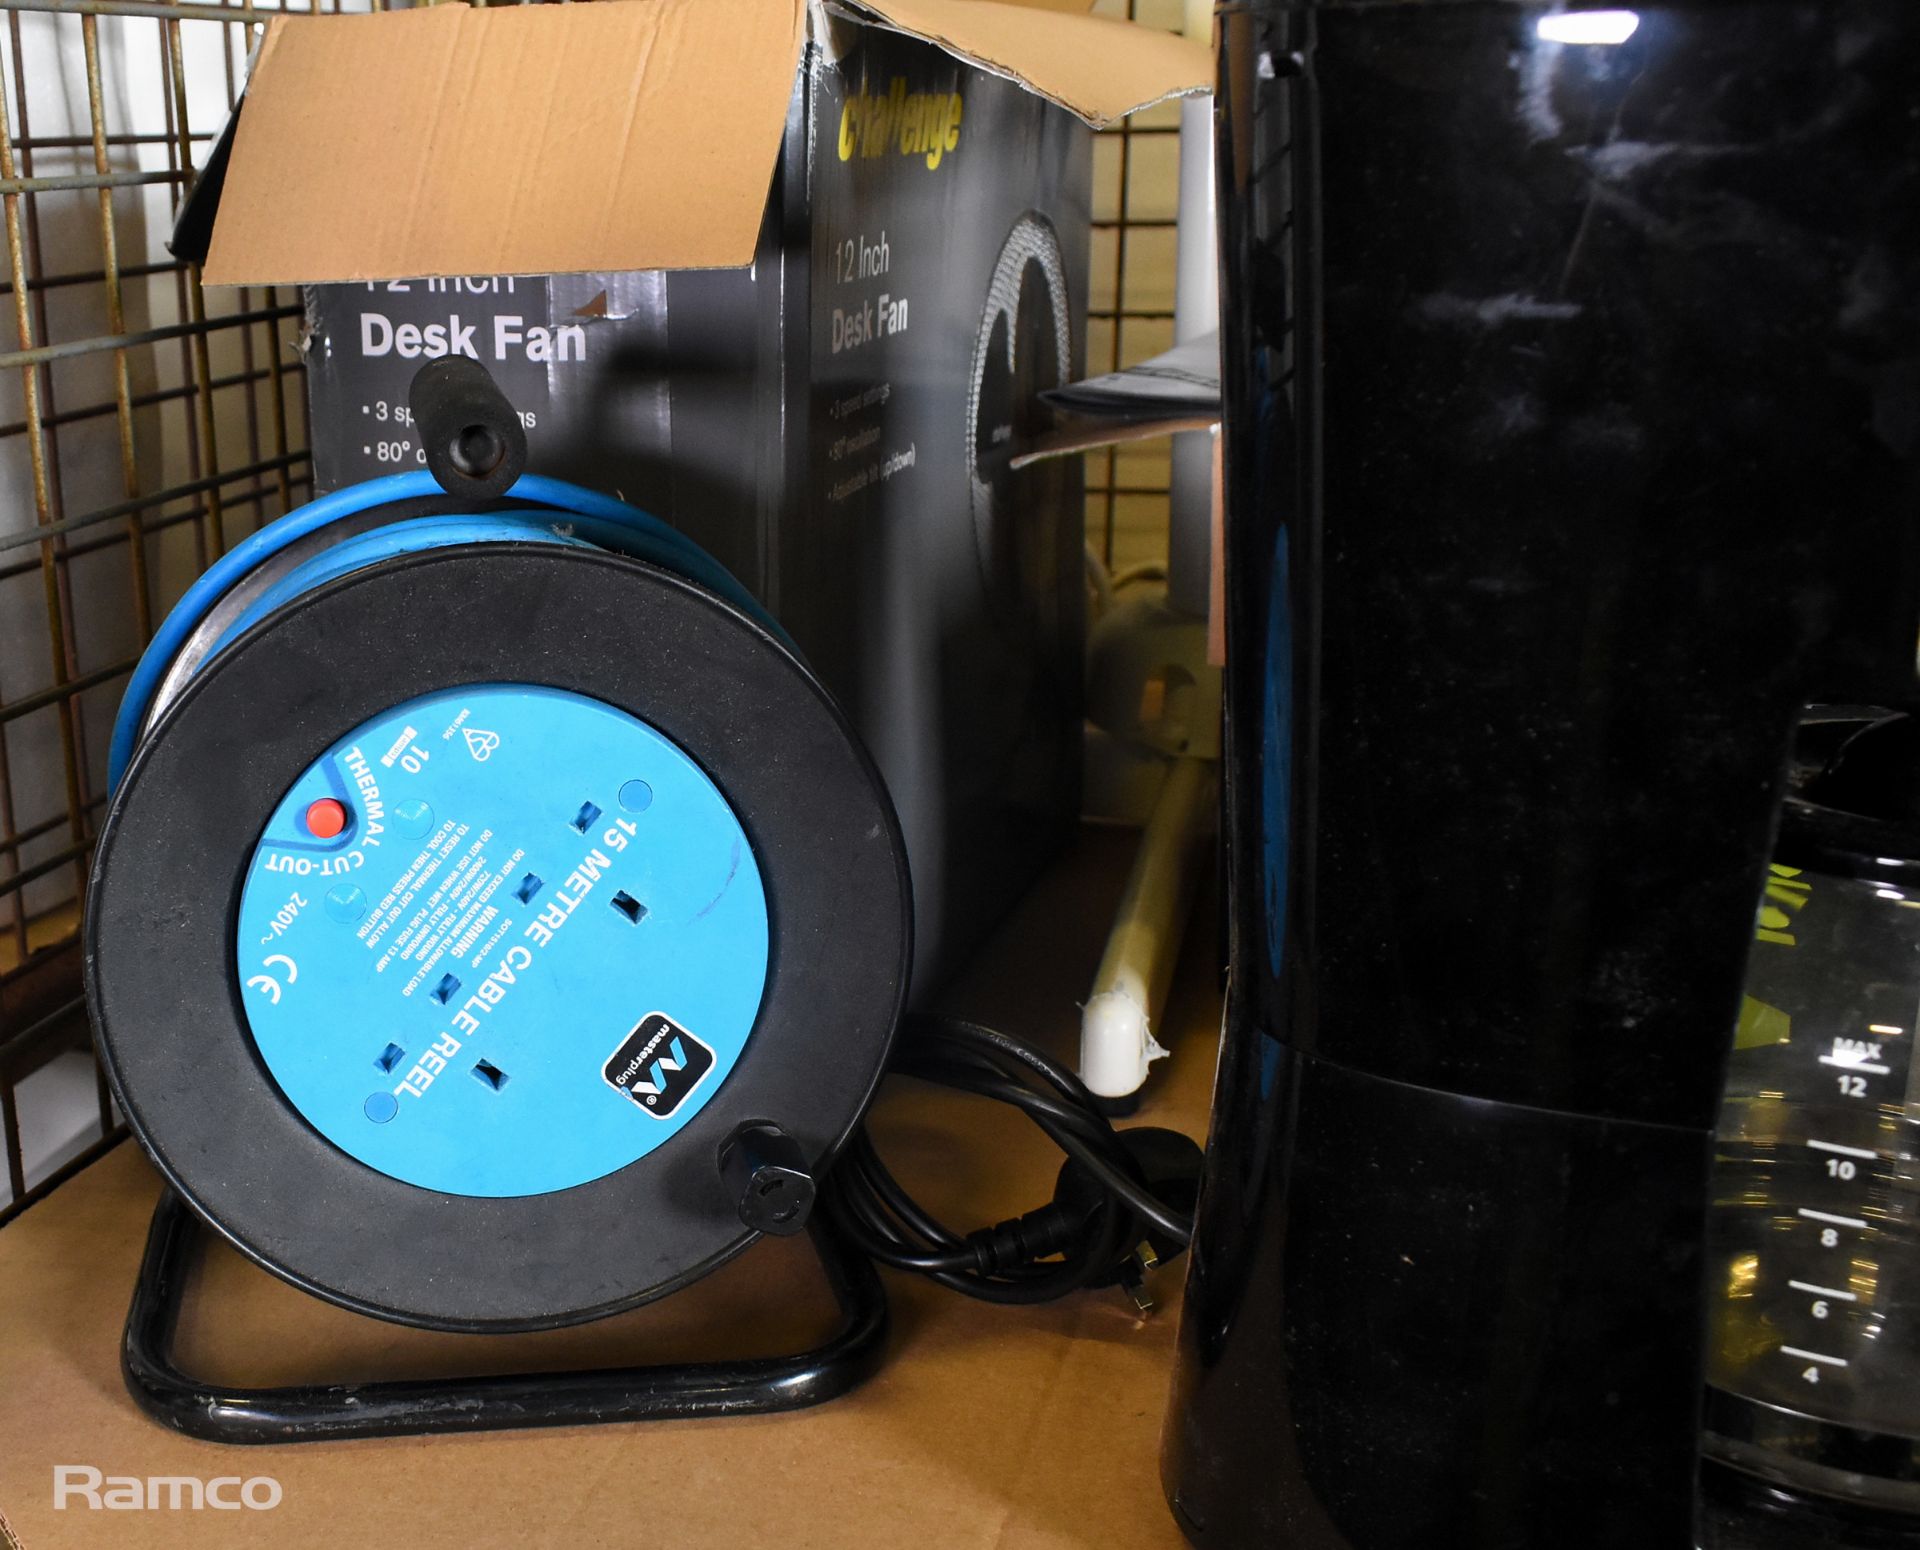 Electrical goods - 8x oscillating fans, kettle, steam iron, coffee percolator, extension lead - Image 4 of 9